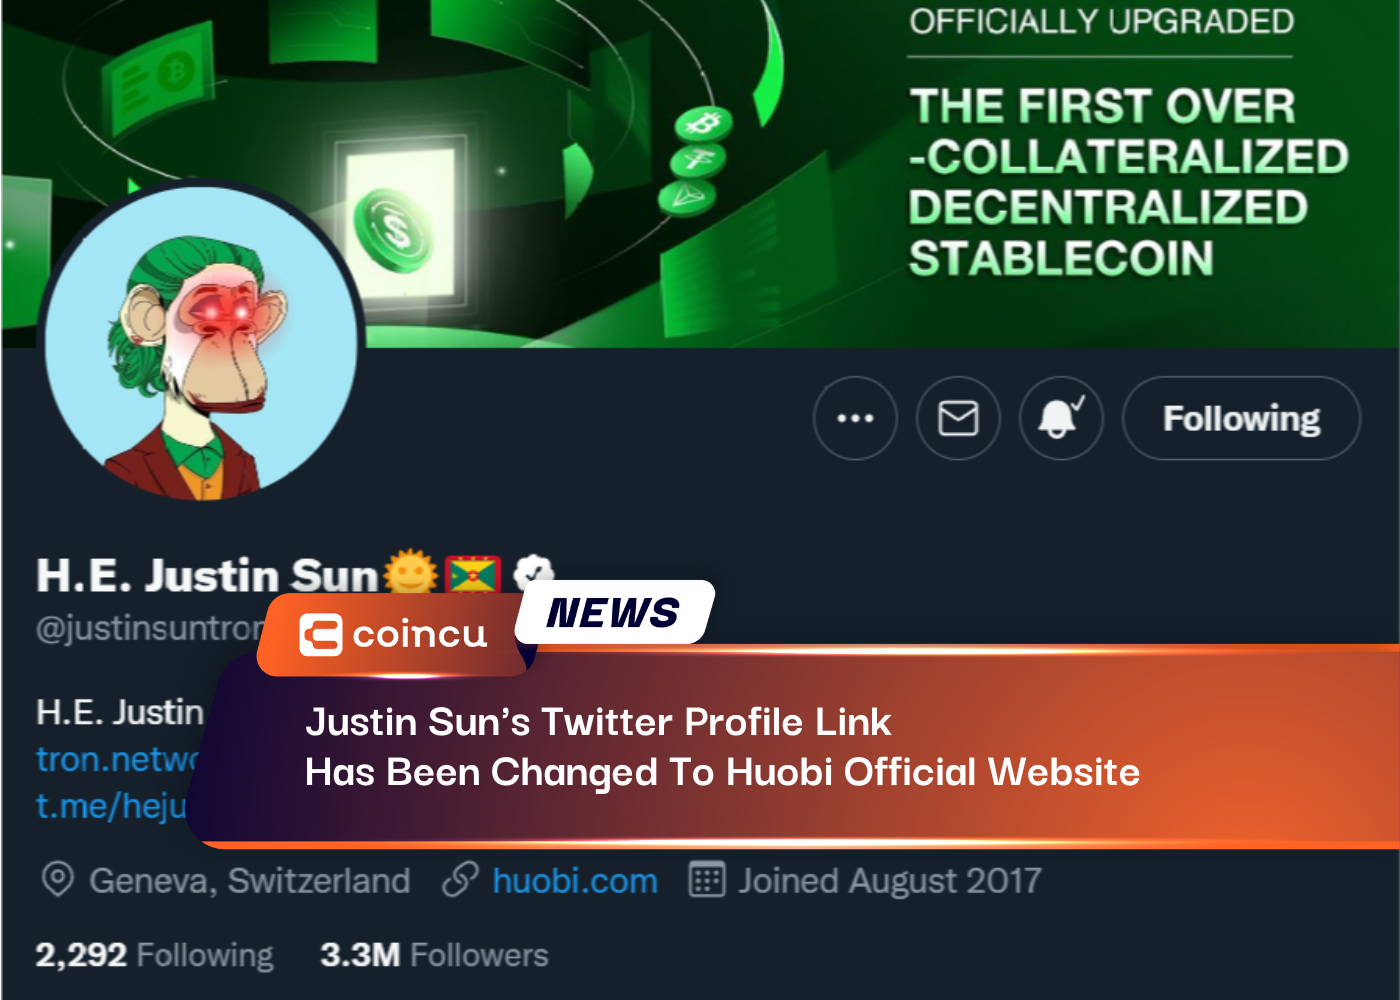 Justin Sun's Twitter Profile Link Has Been Changed To Huobi Official Website